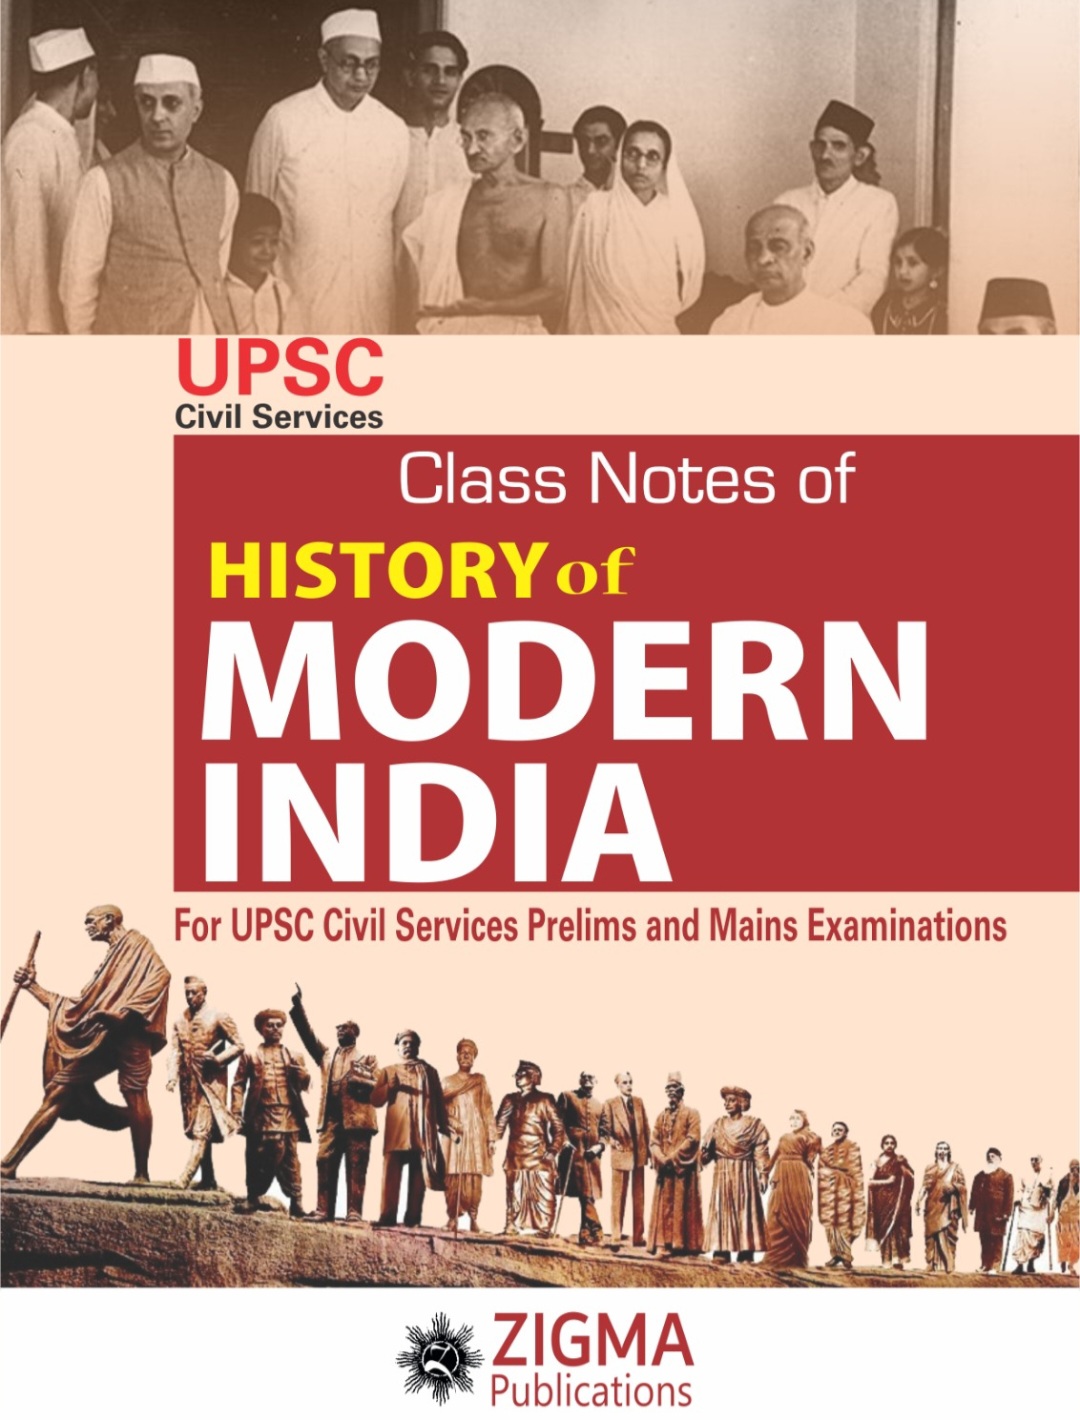 History of MODERN INDIA Class notes UPSC civil services & prelims & mains exam